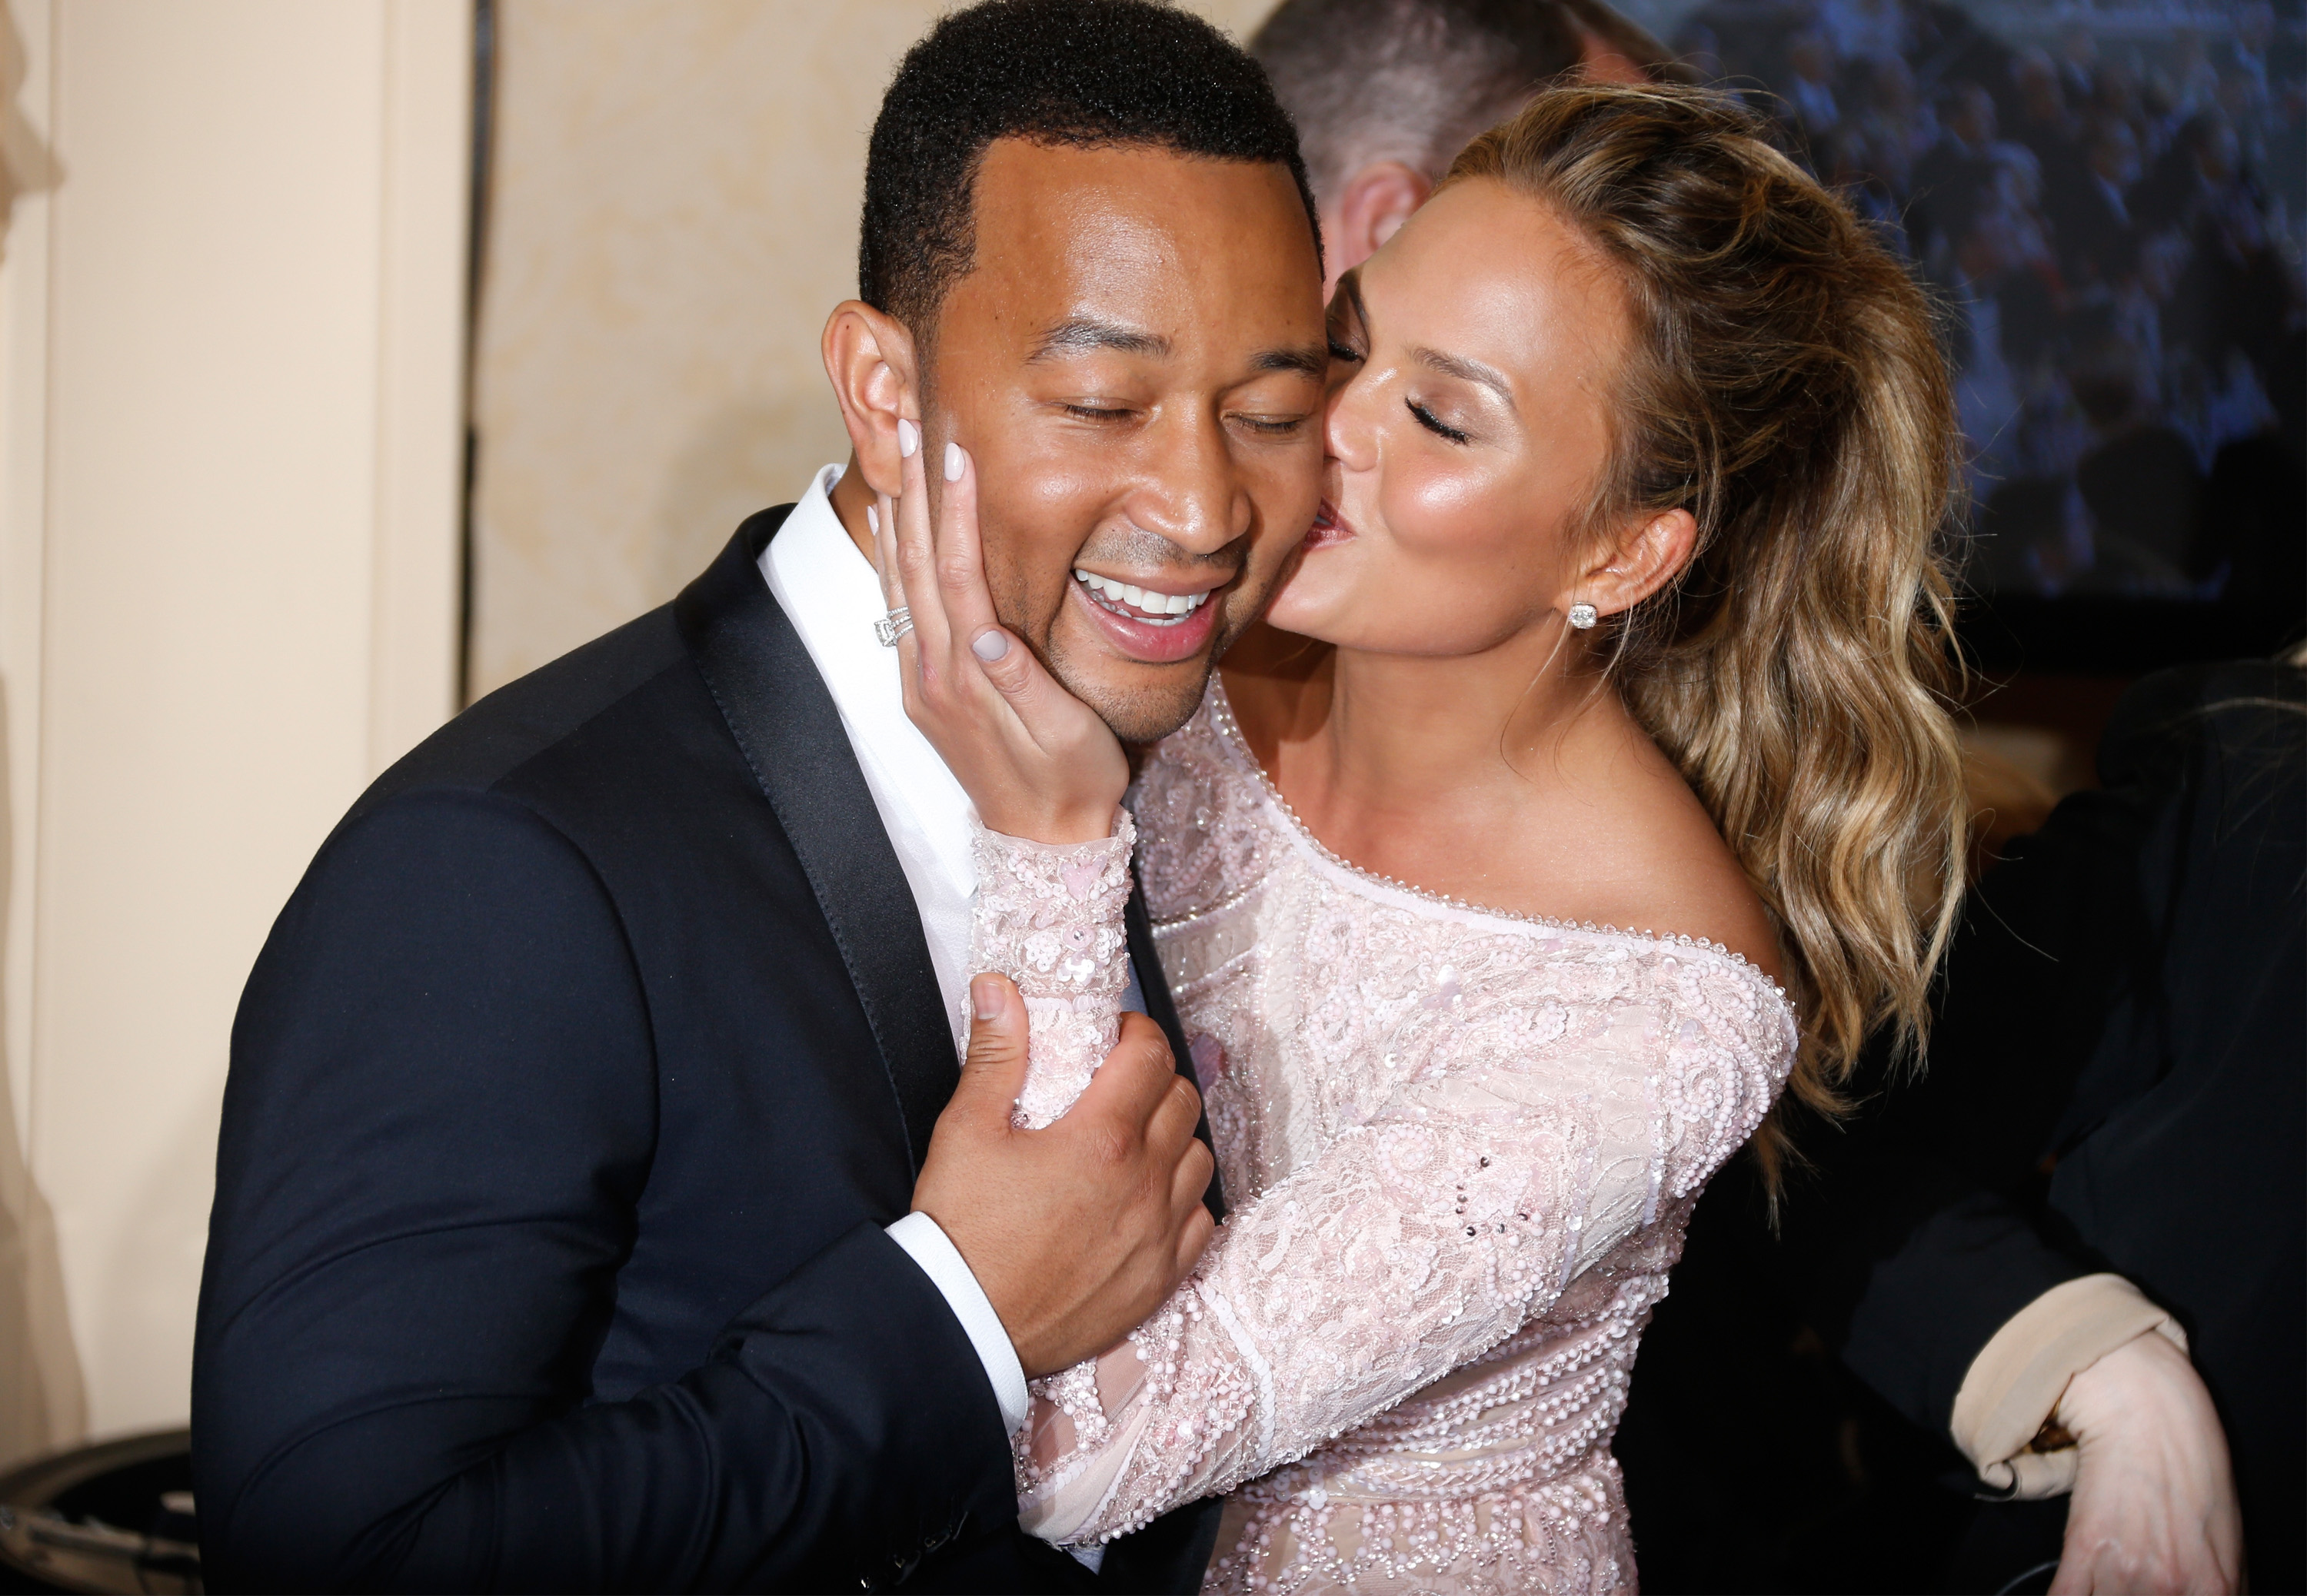 John Legend and Chrissy Teigen at the 72nd Annual Golden Globe Awards in Beverly Hills, 2015 | Source: Getty Images